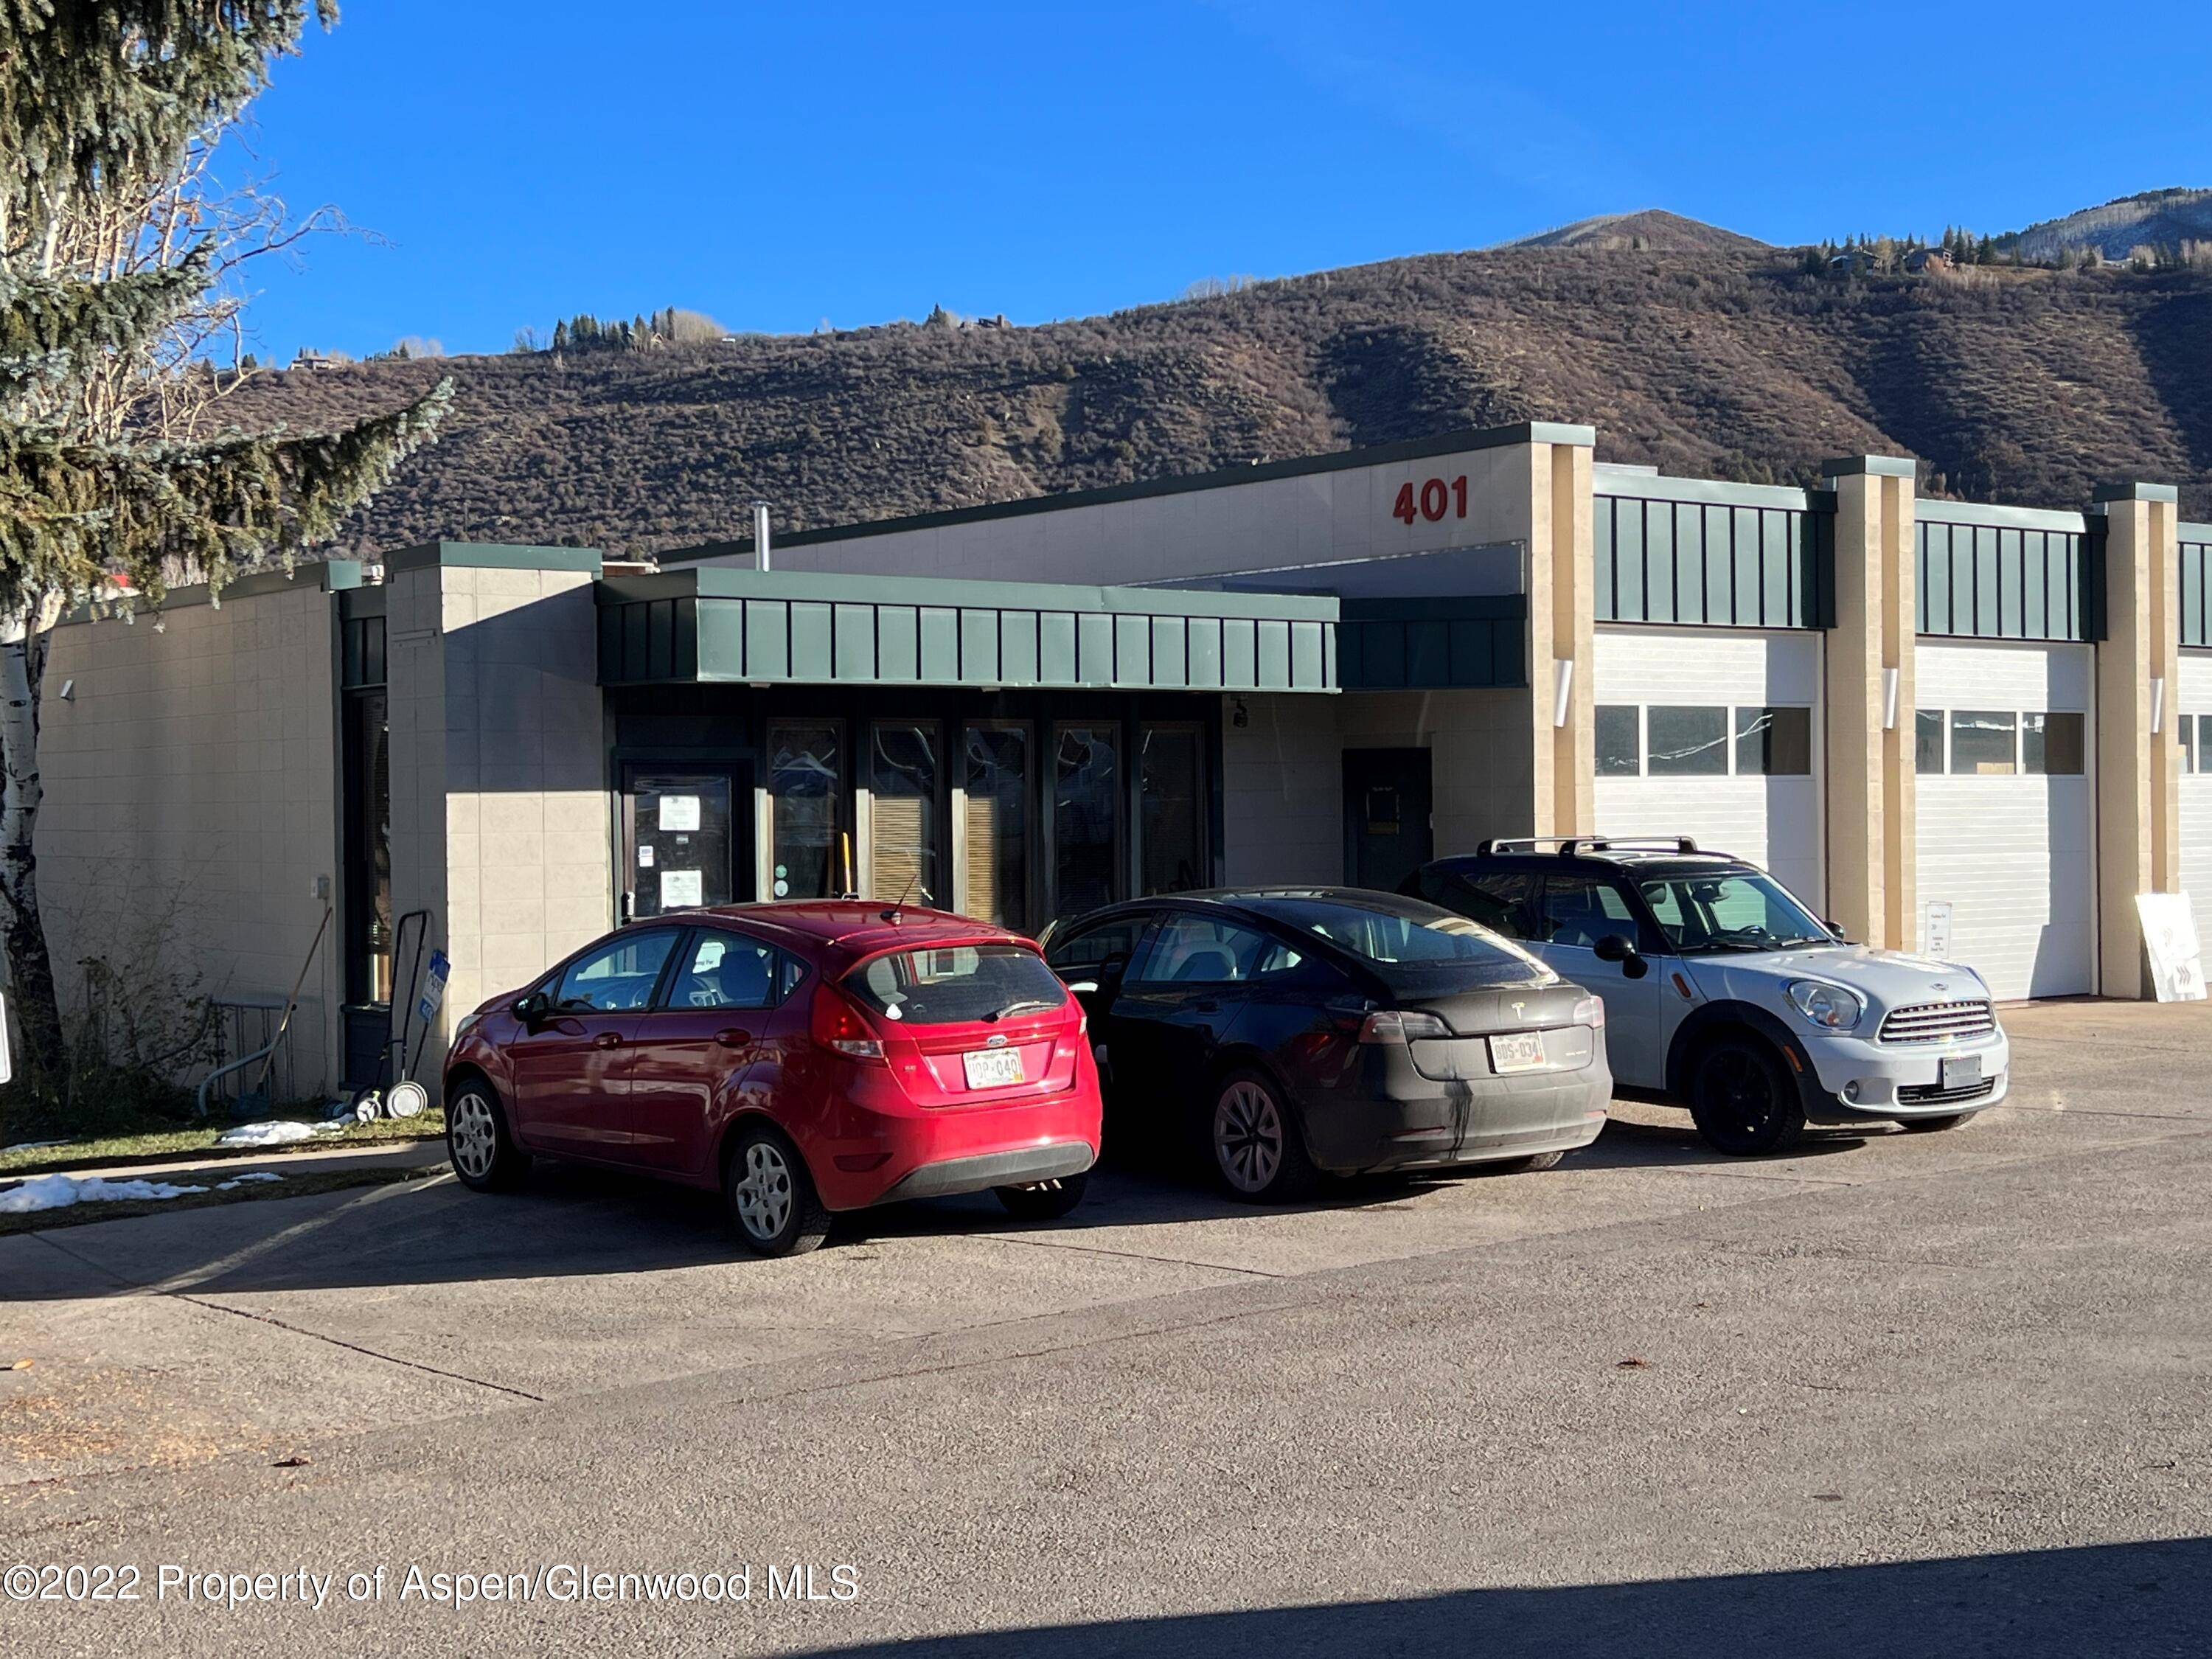 AABC commercial building with a single tenant with a lease in place through September 2027.